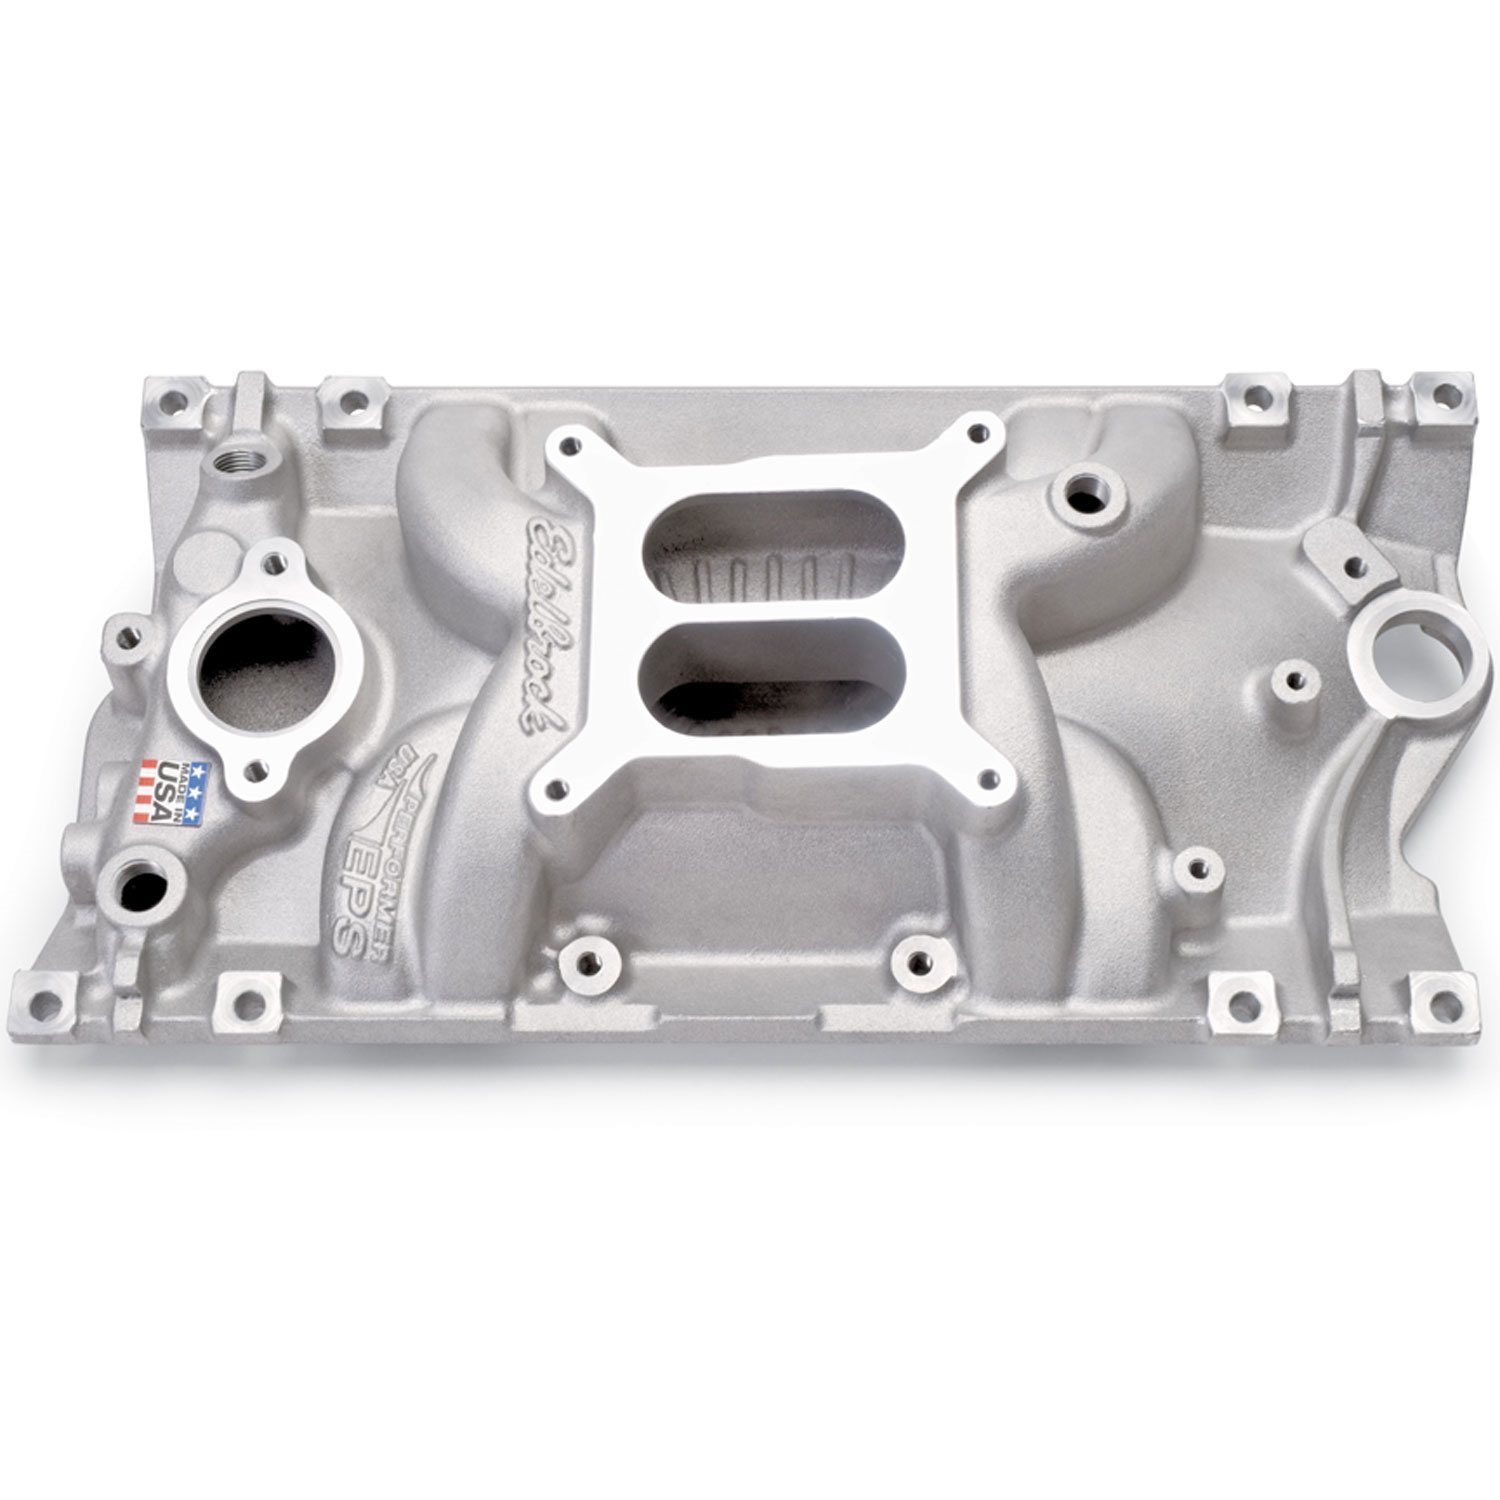 Performer EPS Vortec Intake Manifold for Small Block